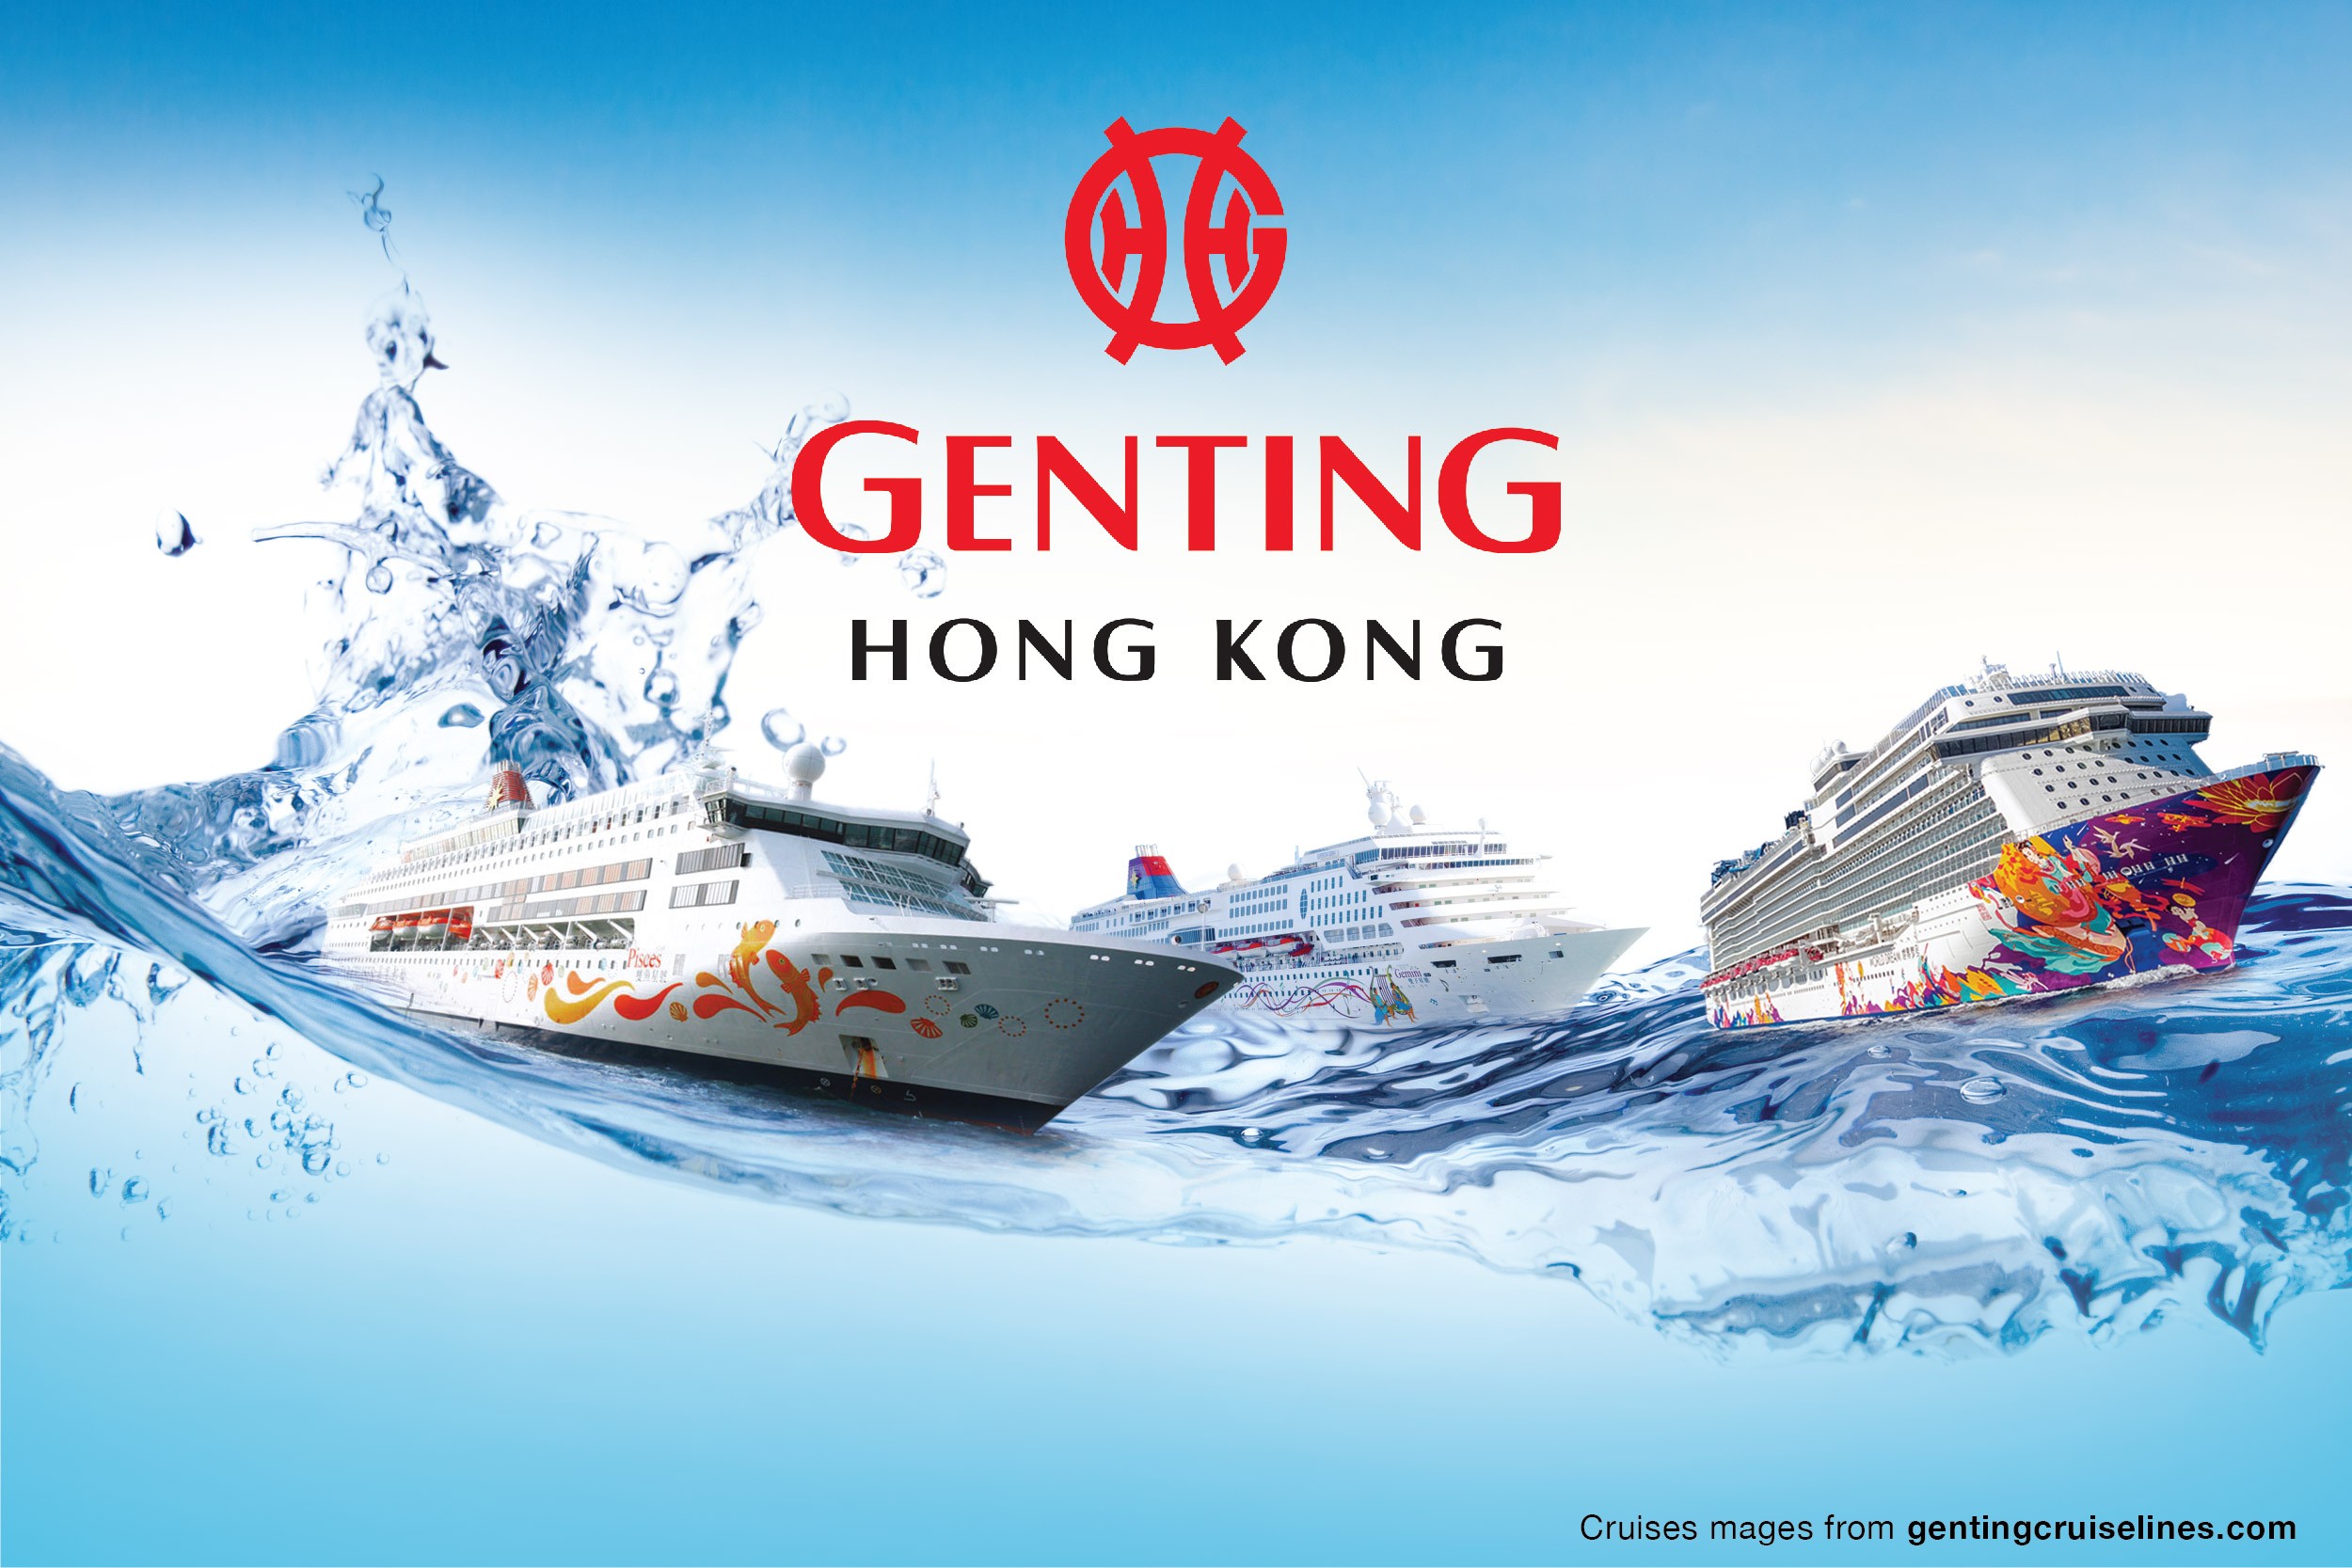 Body blow for cruise tourism with the winding up of Genting Hong Kong’s brands